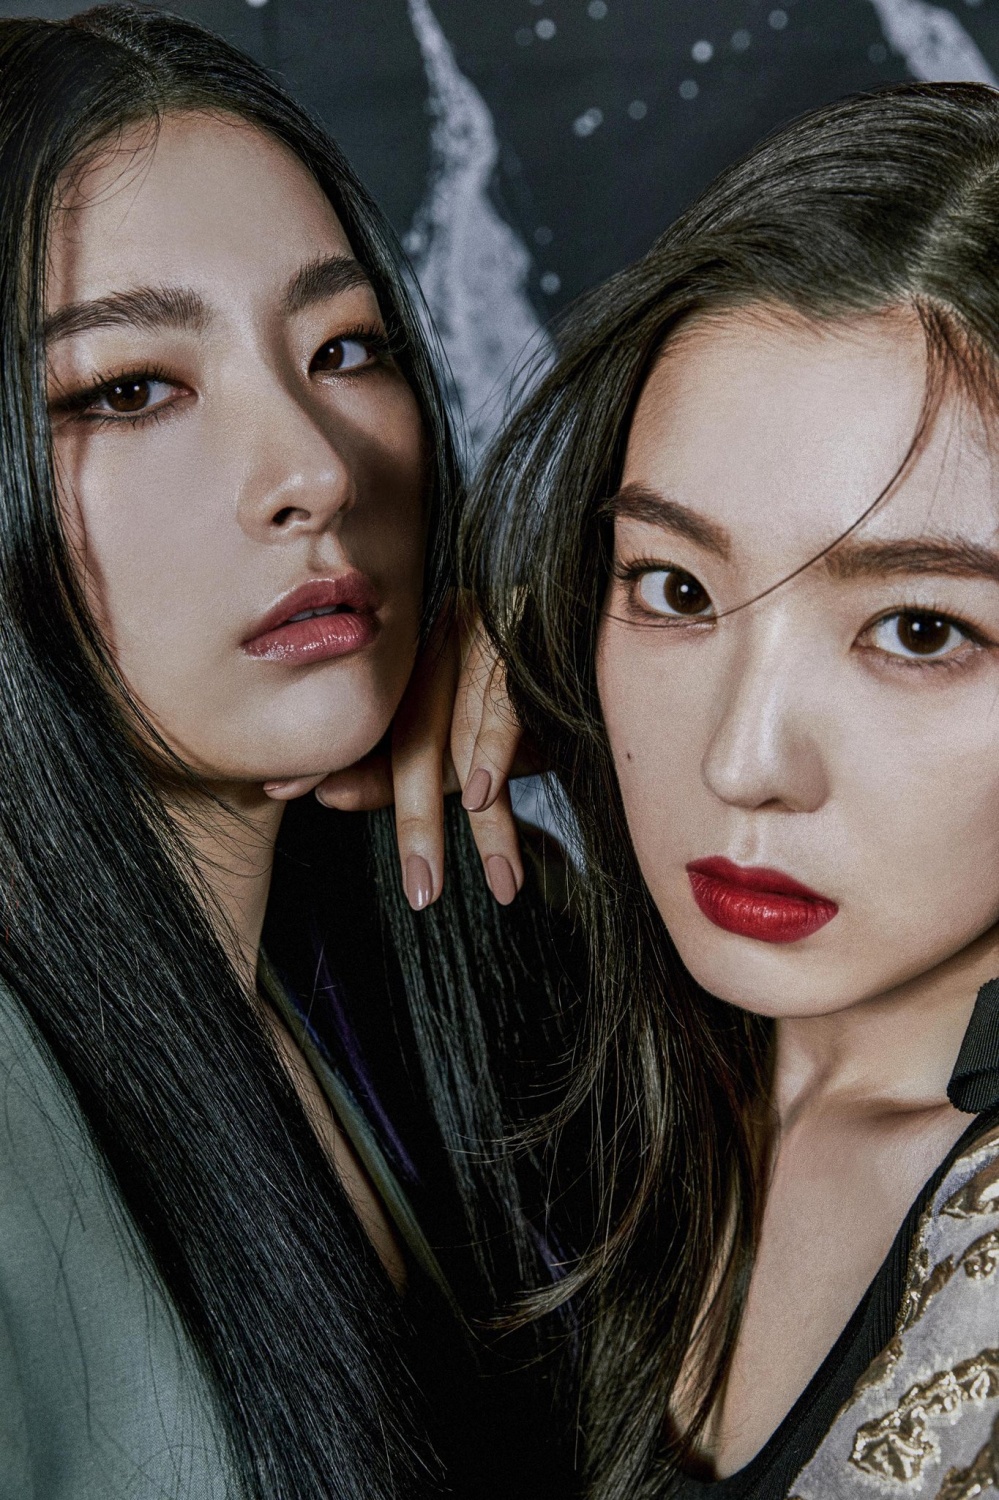 Red Velvet Irene & Seulgi to Perform on "TIME 100 Talks" + Check Out The Exclusive Details